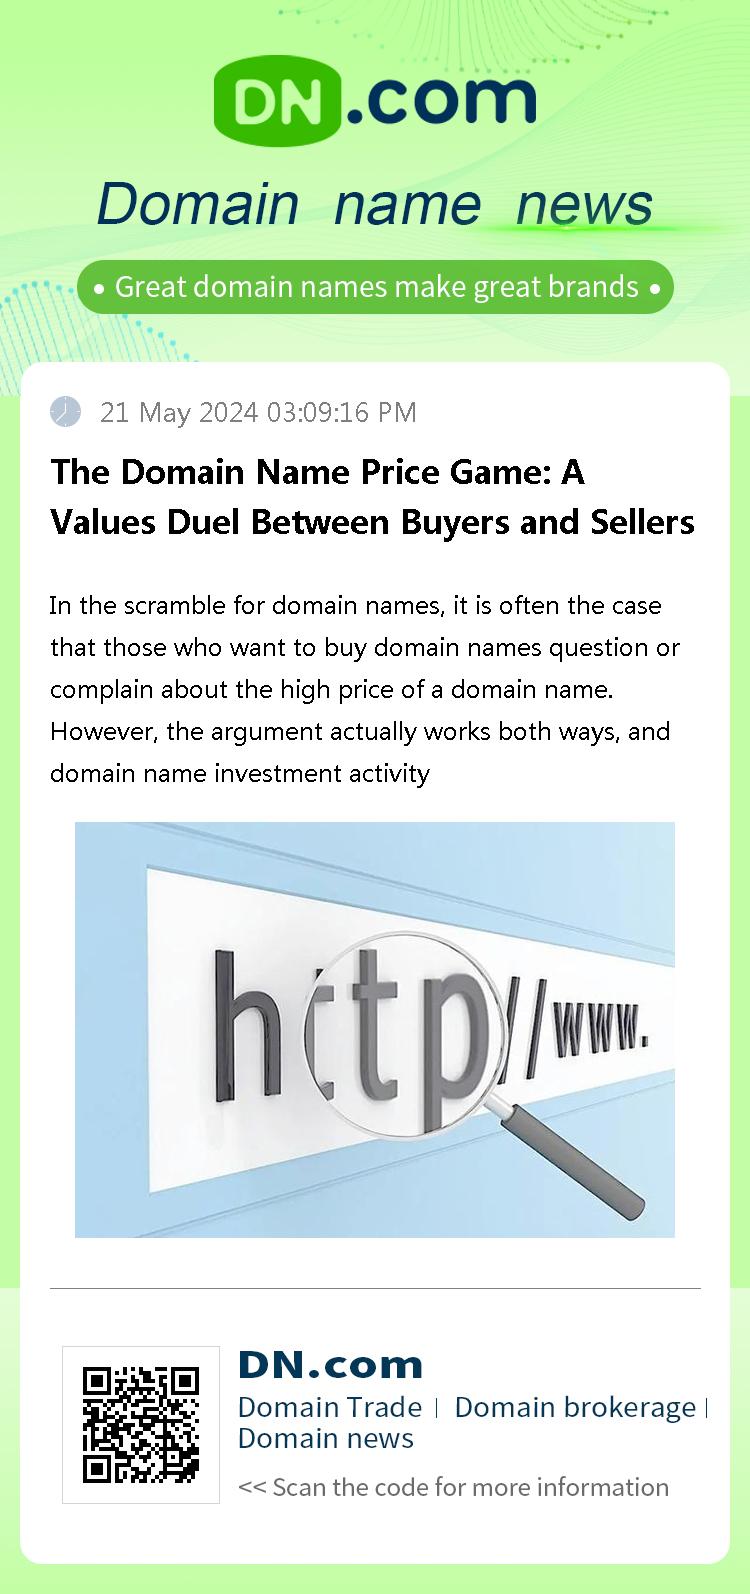 The Domain Name Price Game: A Values Duel Between Buyers and Sellers